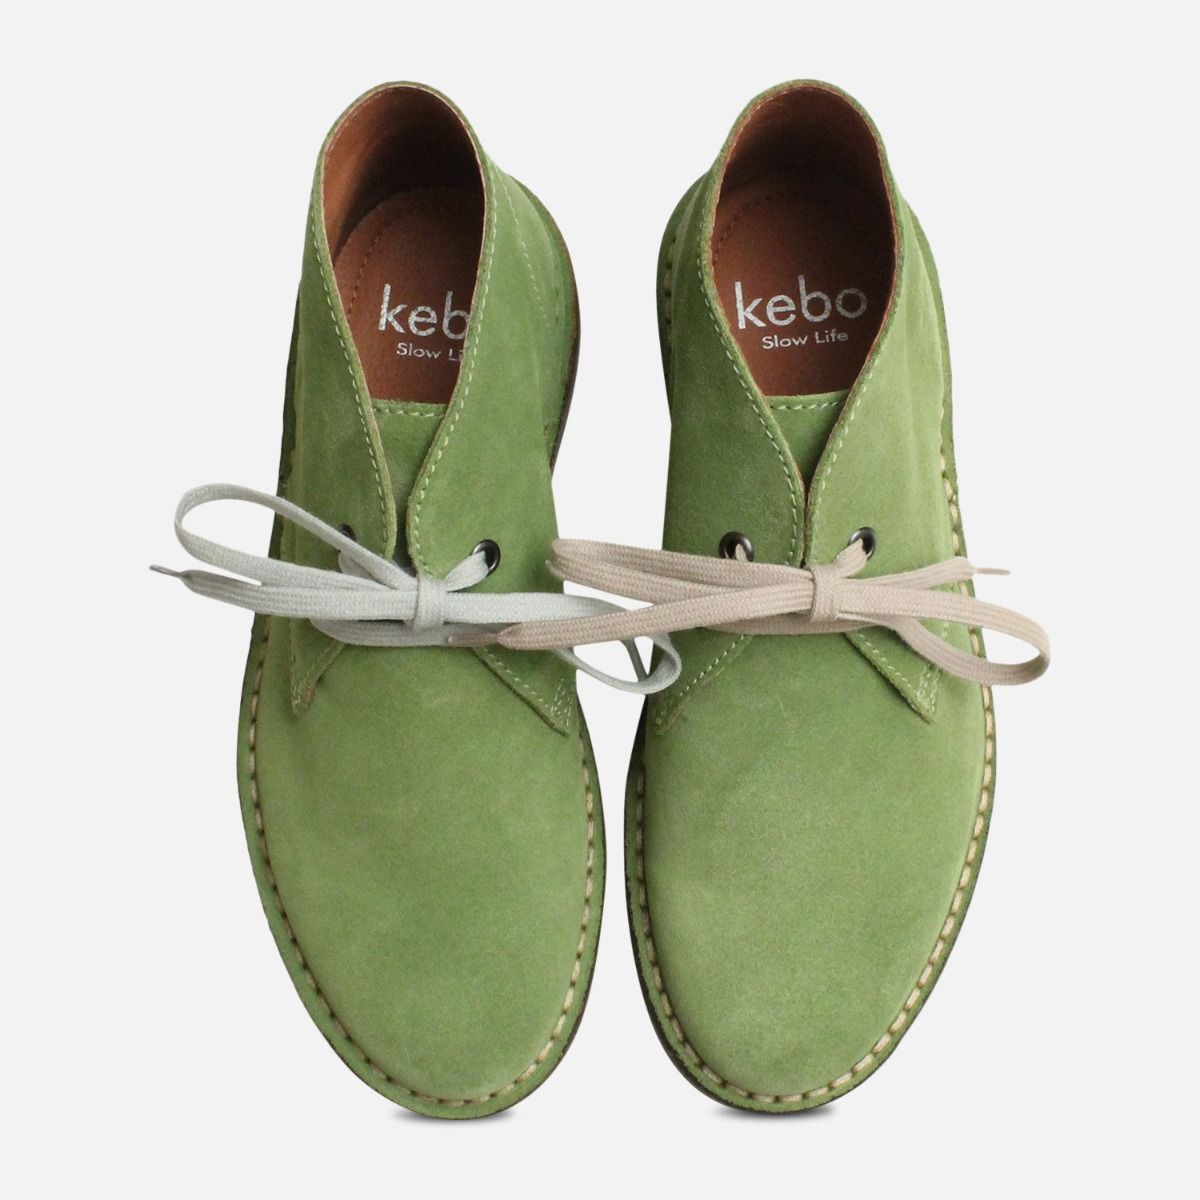 green suede womens shoes